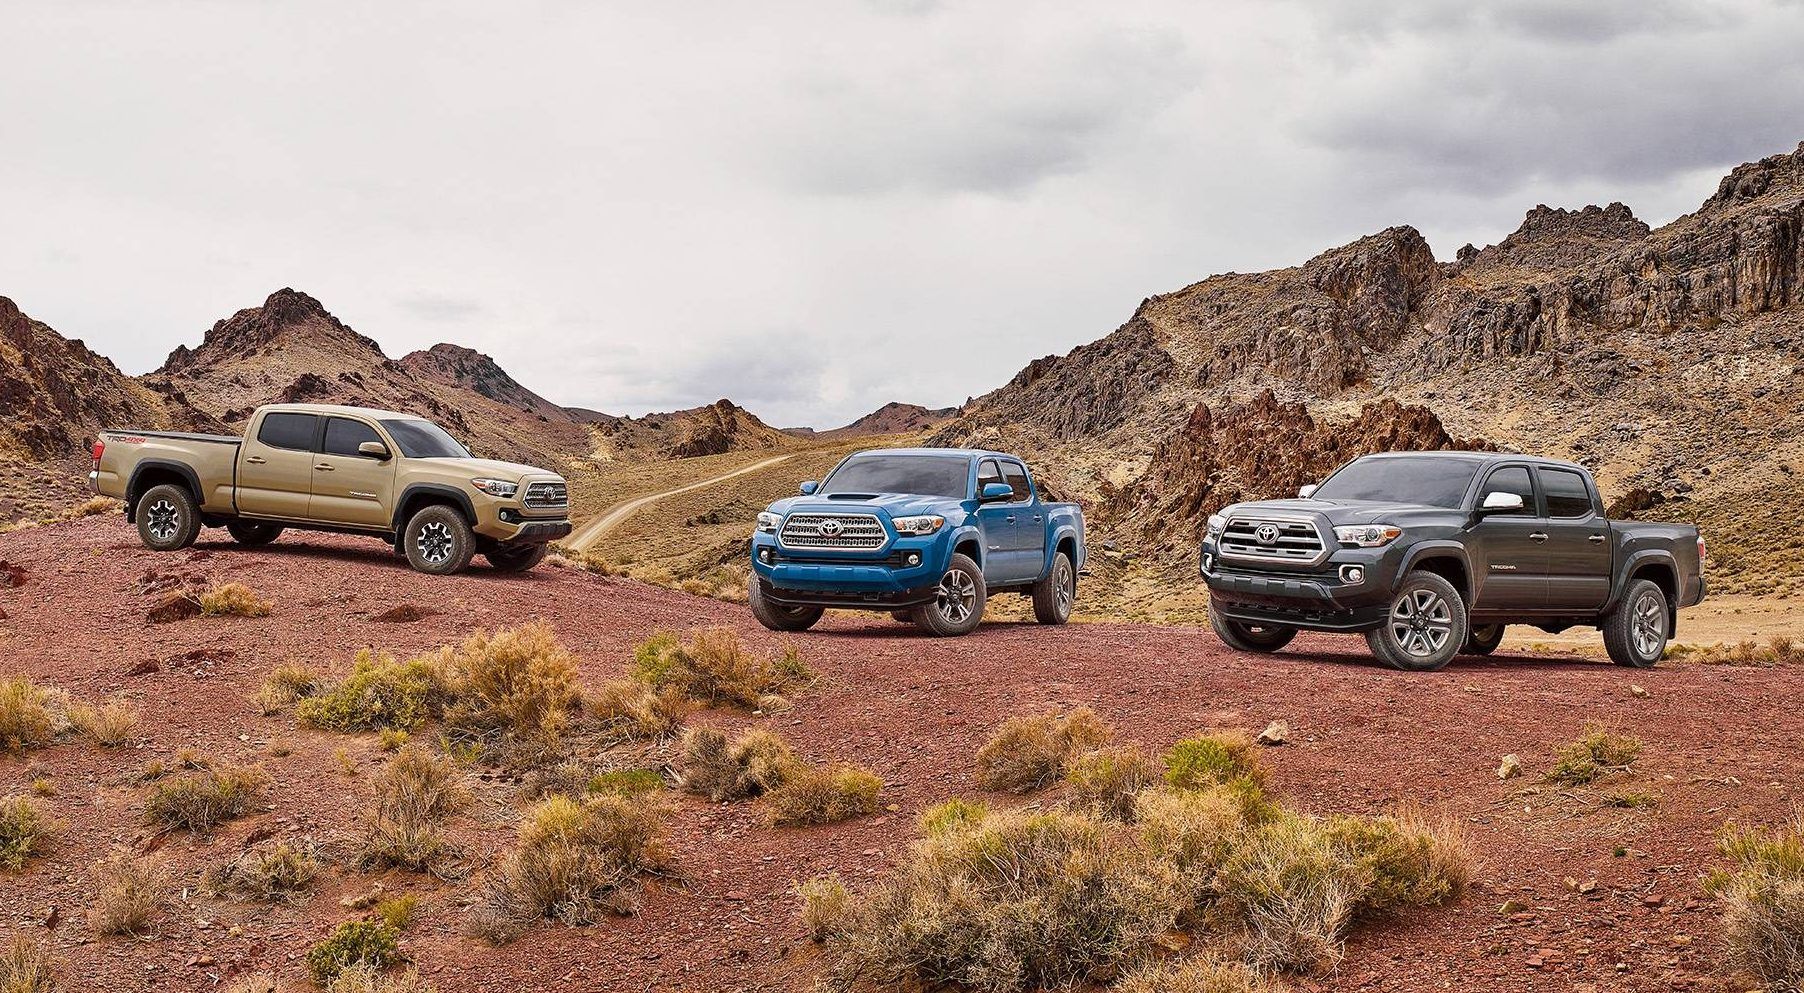 Toyota Tundra vs Toyota Tacoma: Which One Should You Buy?